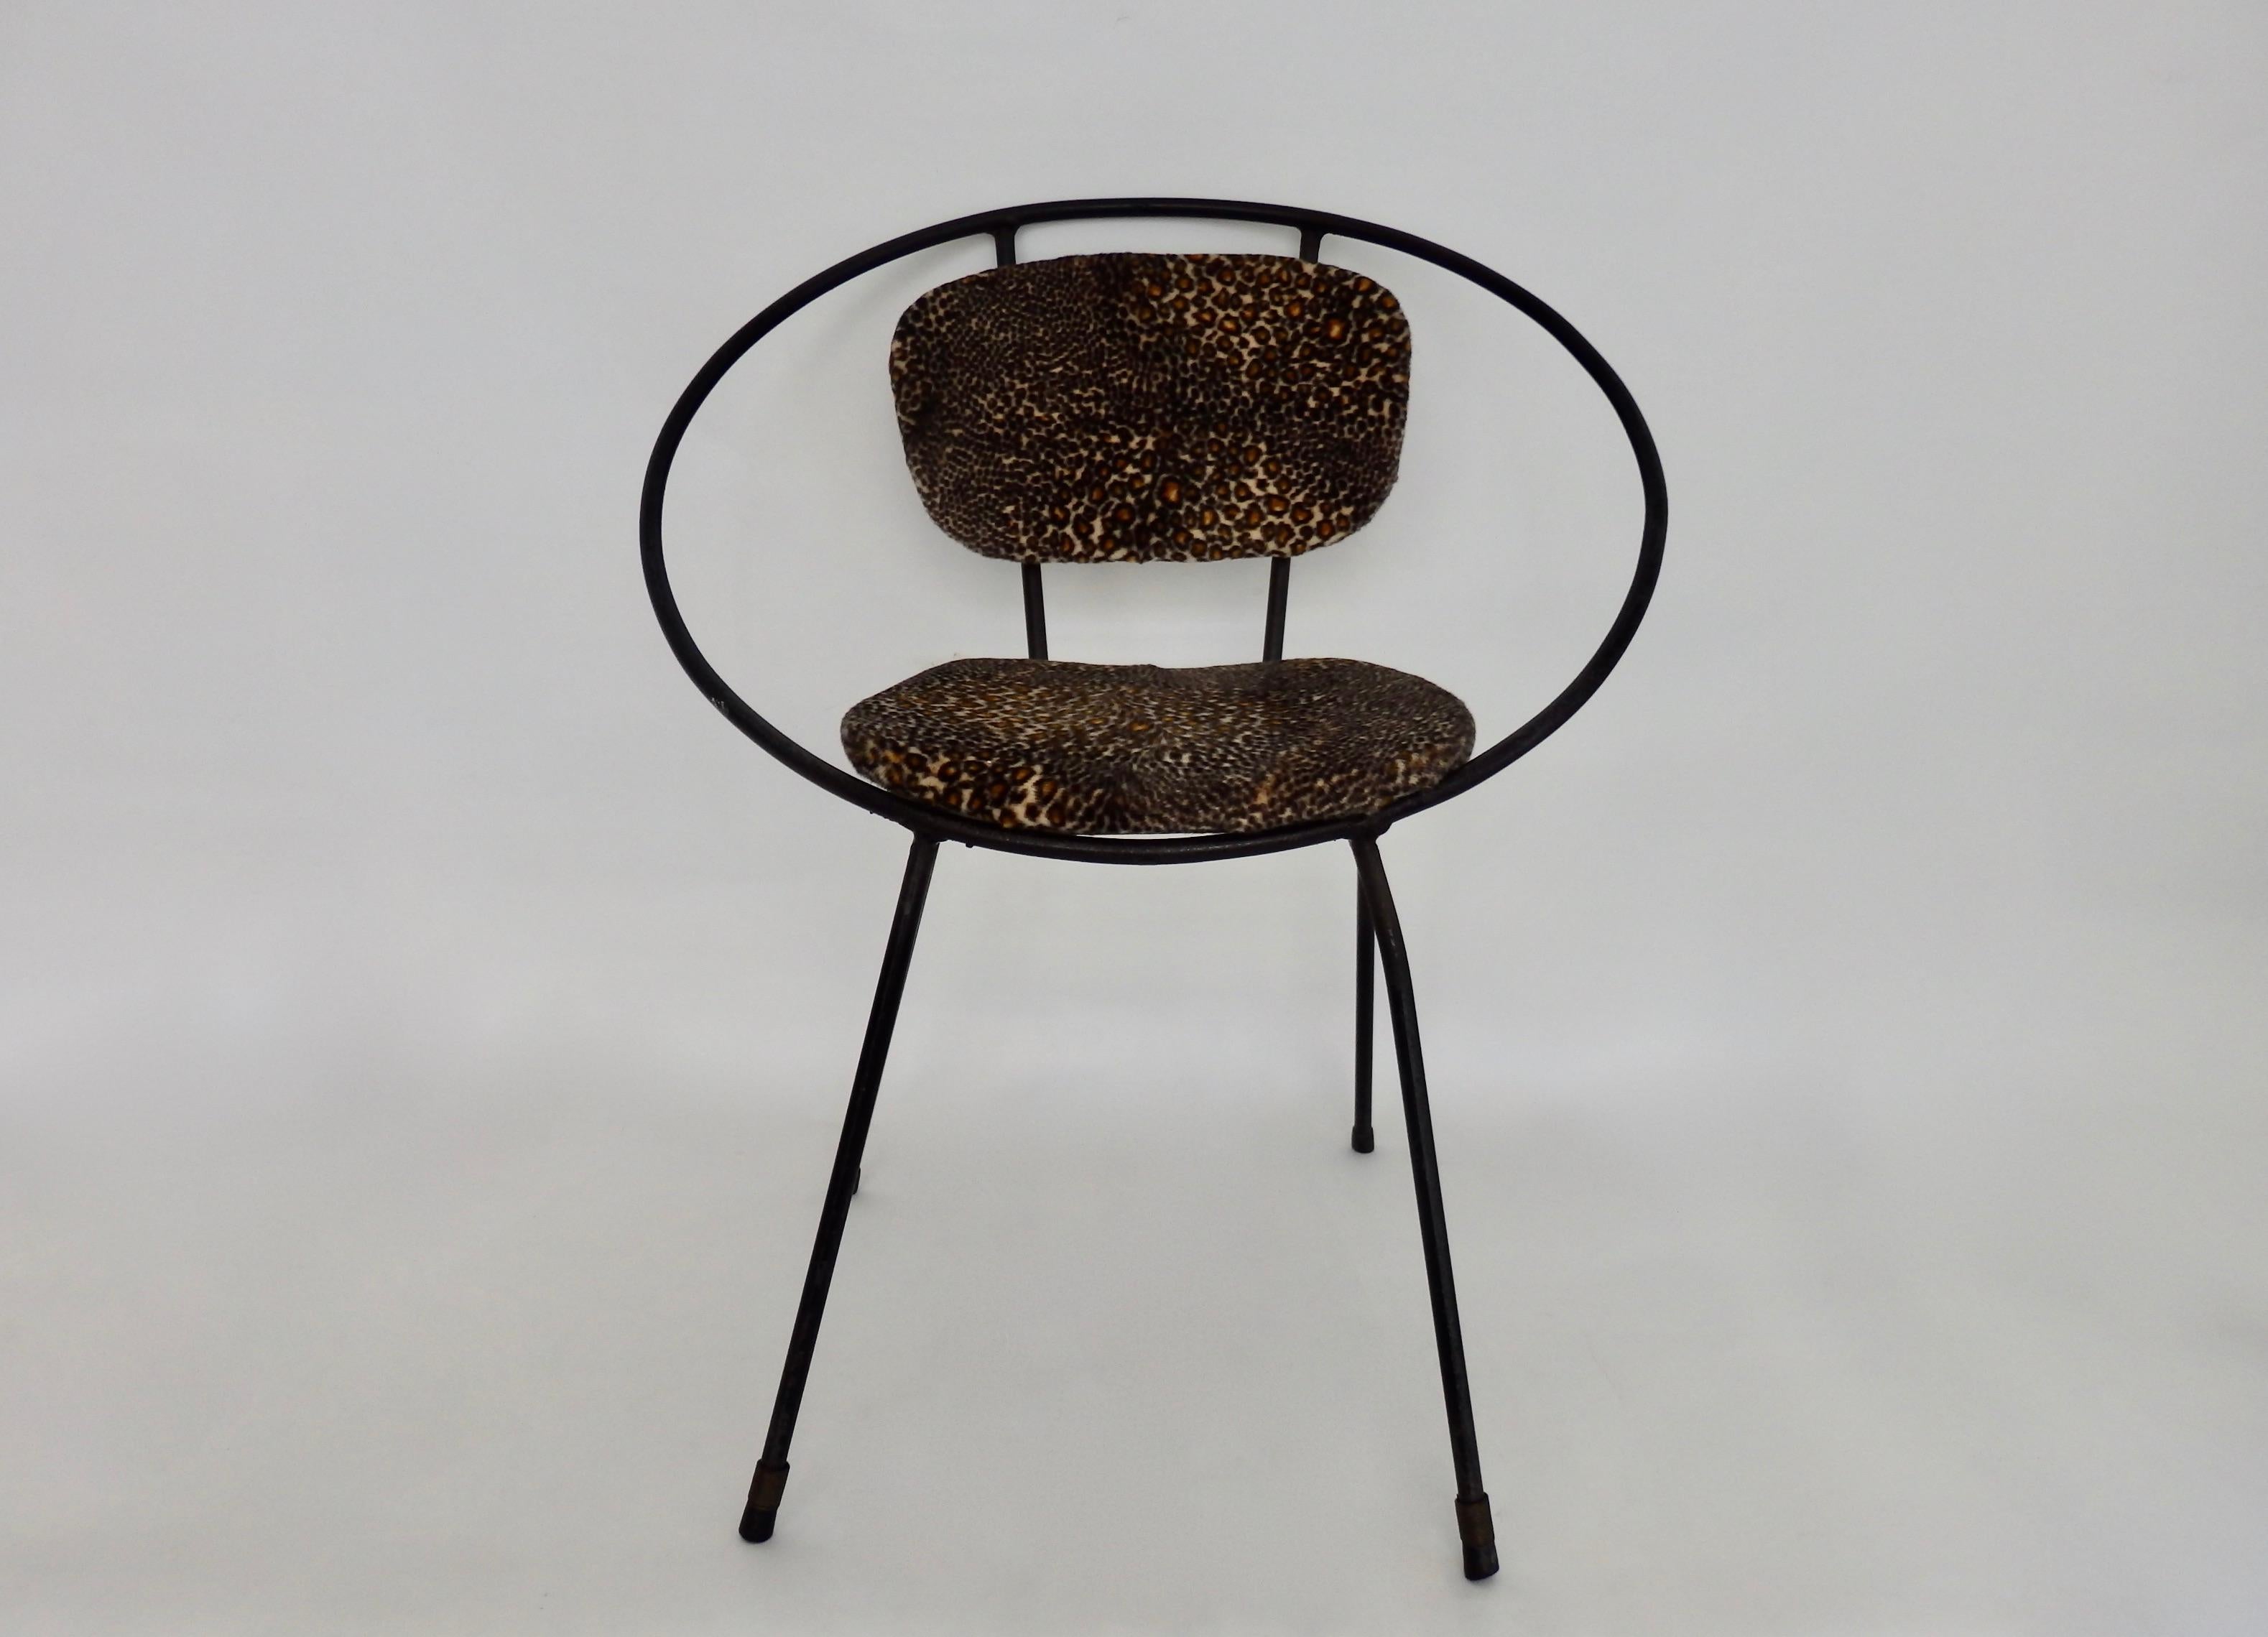 In the style of Tony Paul, a stylish children's hoop chair or salesman sample made of wrought iron and leopard print fabric.